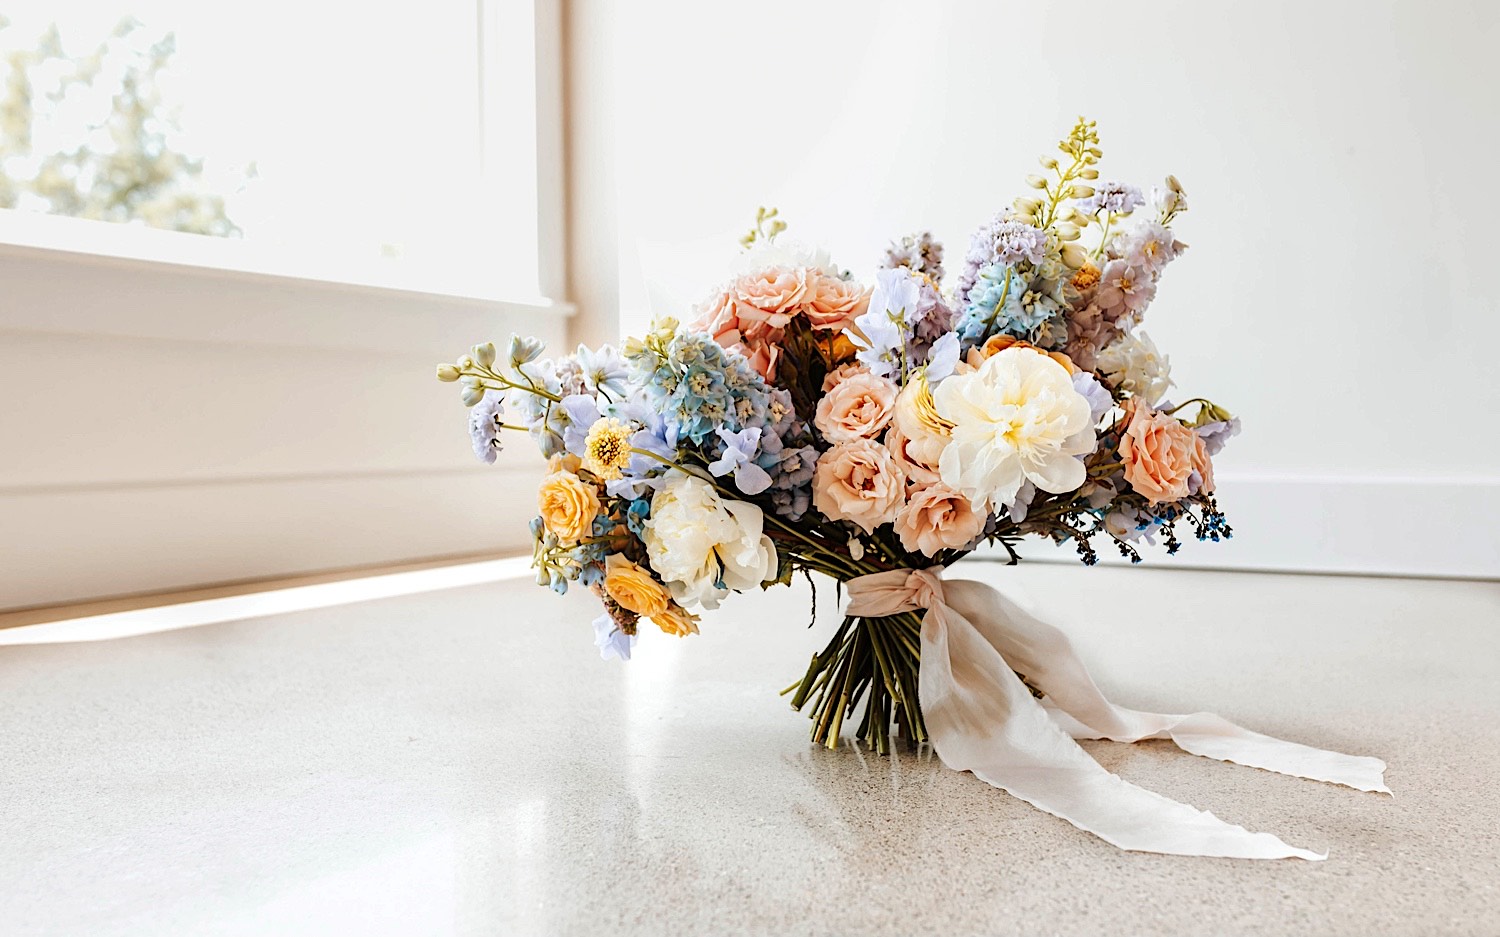 A bouquet of flowers sits on the floor in front of a window